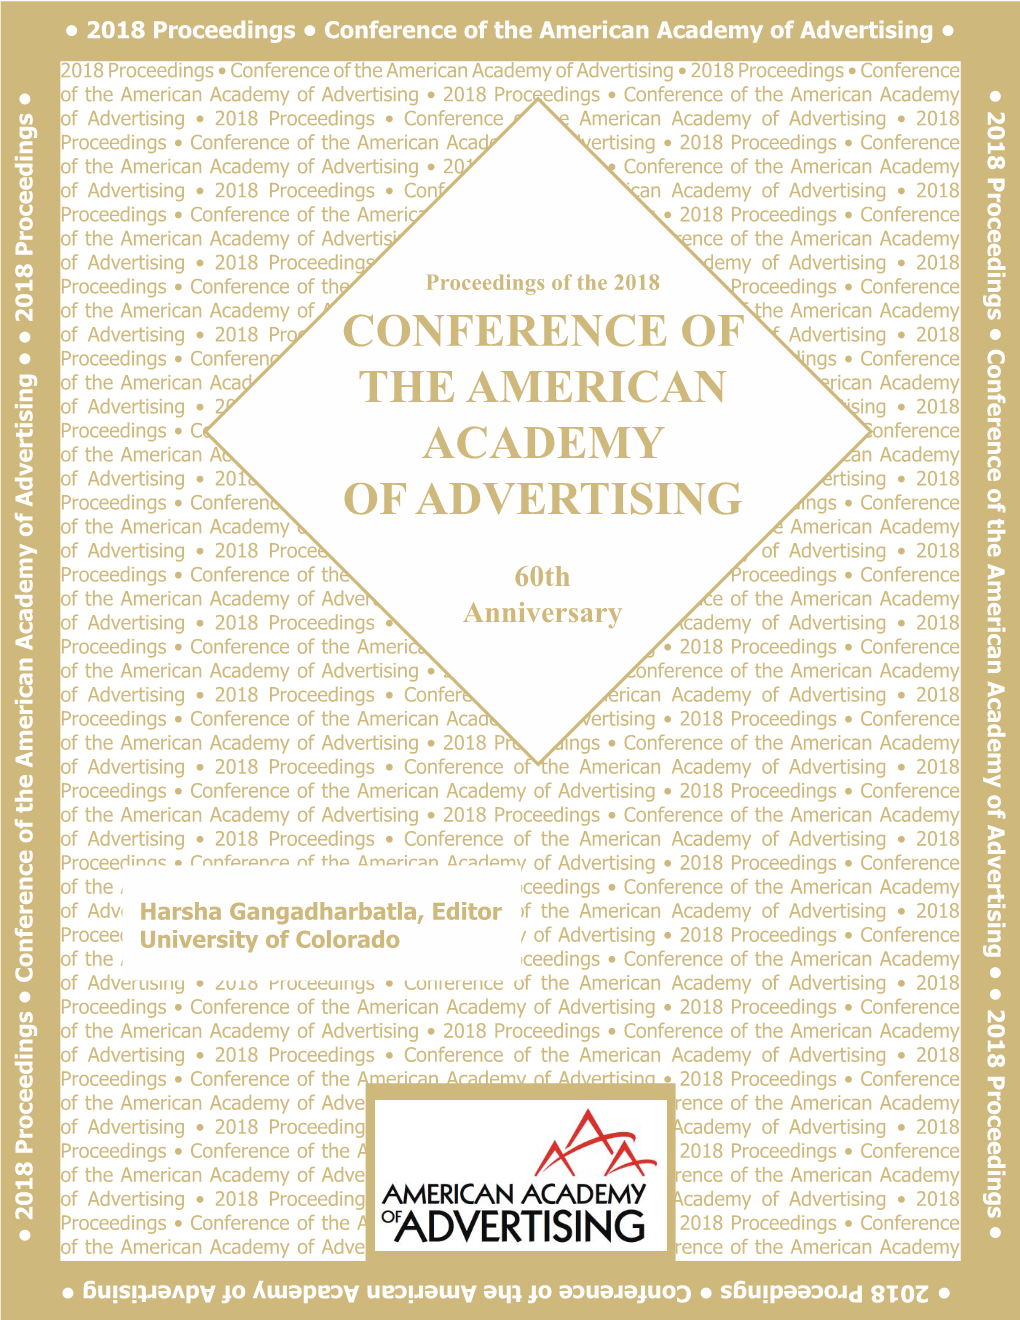 Proceedings of the 2018 Conference of the American Academy of Advertising